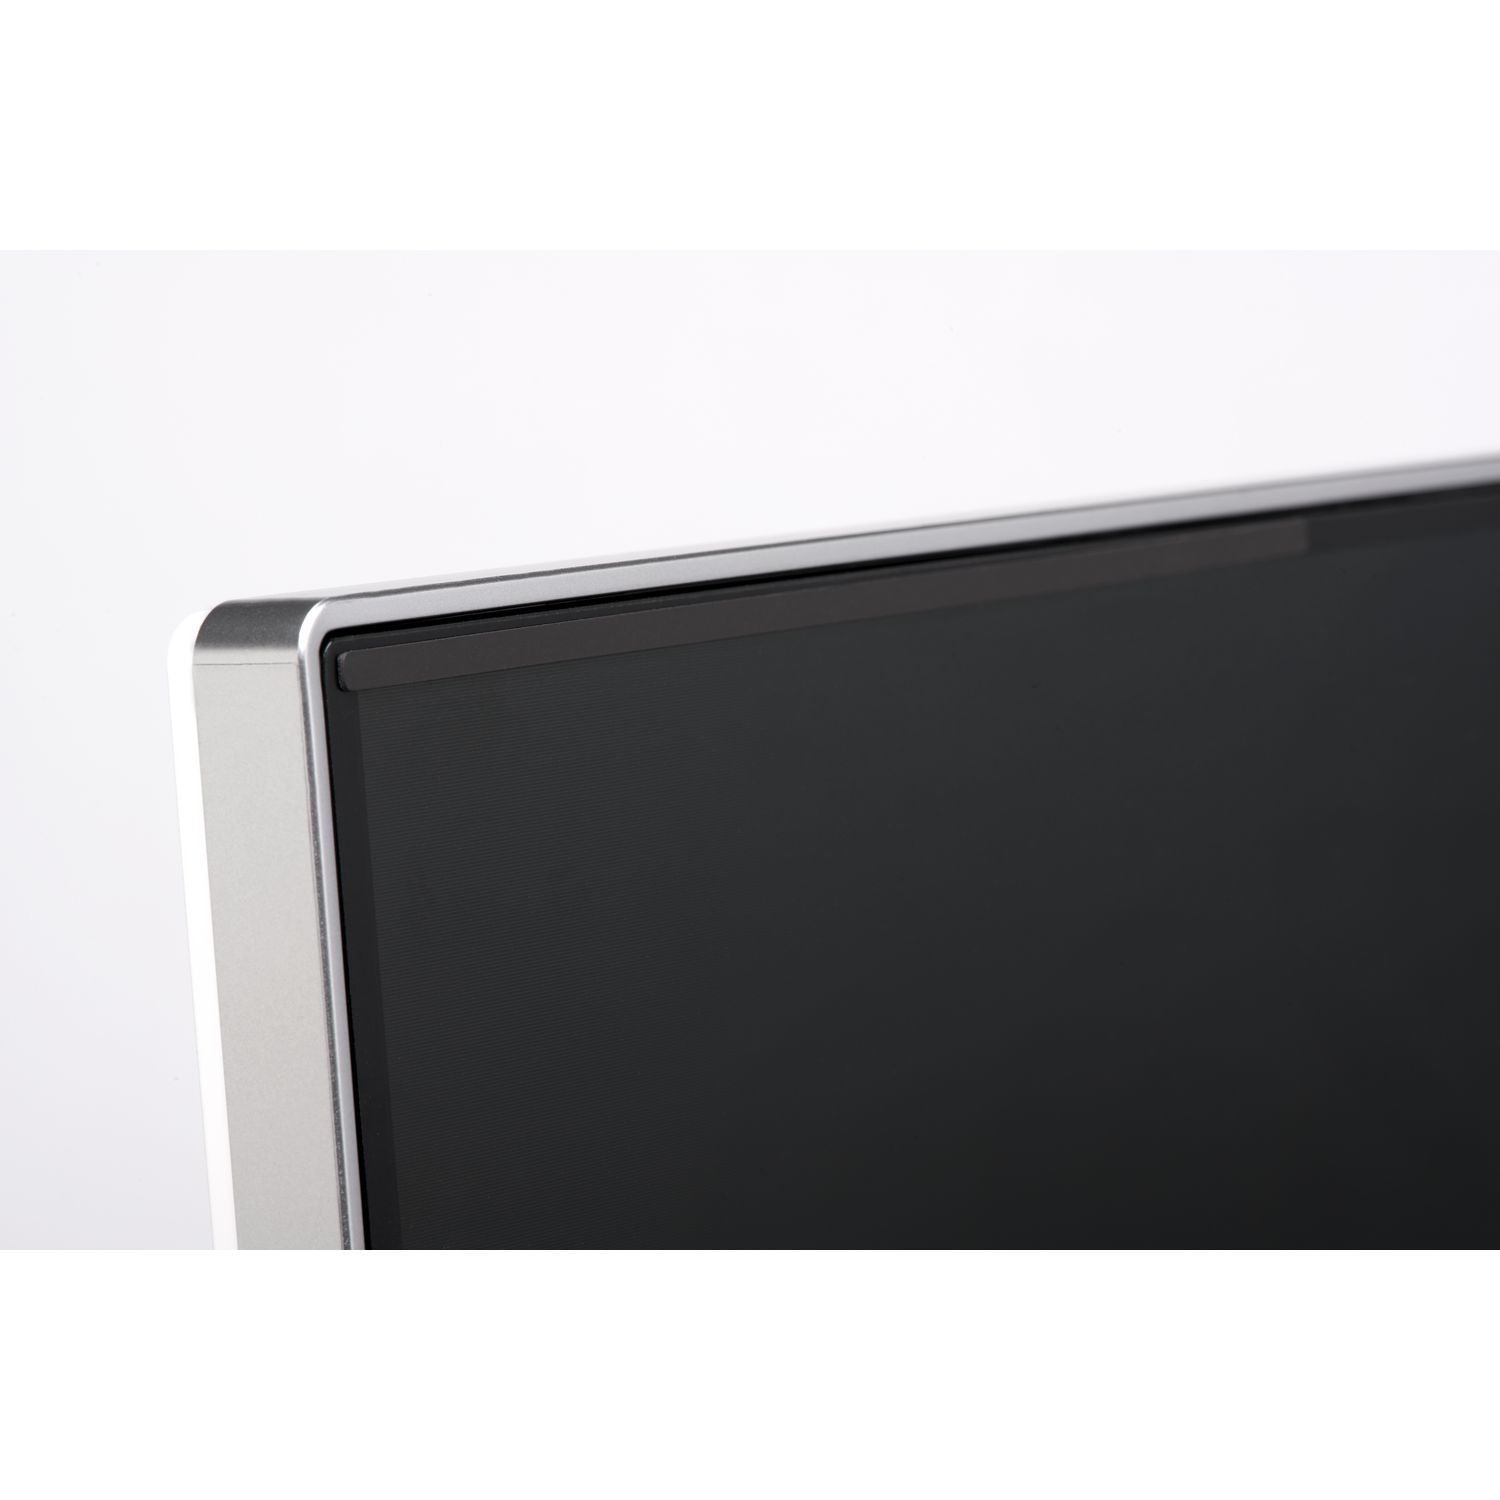 magnetic-monitor-privacy-screen-for-215-widescreen-flat-panel-monitors-169-aspect-ratio_kmw58354 - 3